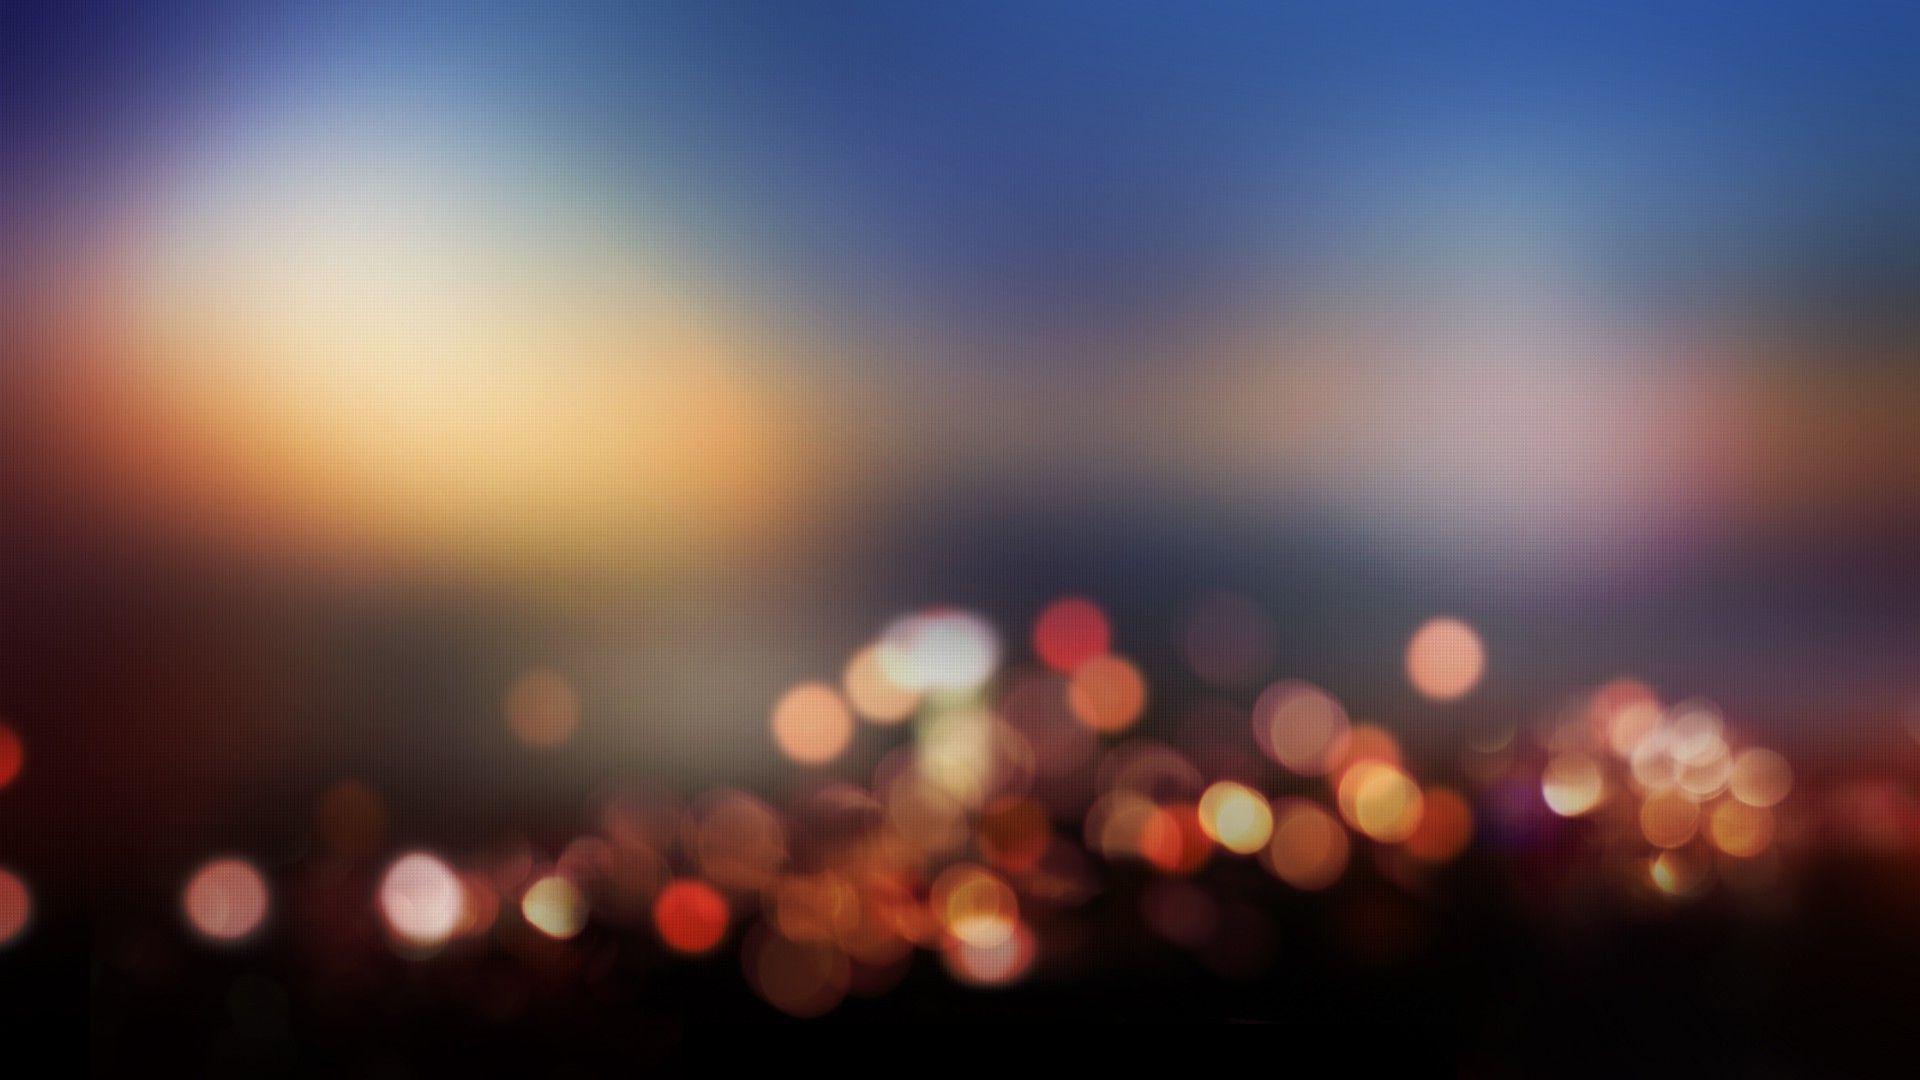 Blurred City Lights Photography Hd Wallpaper 1920×1080 9111 « ENQWEST